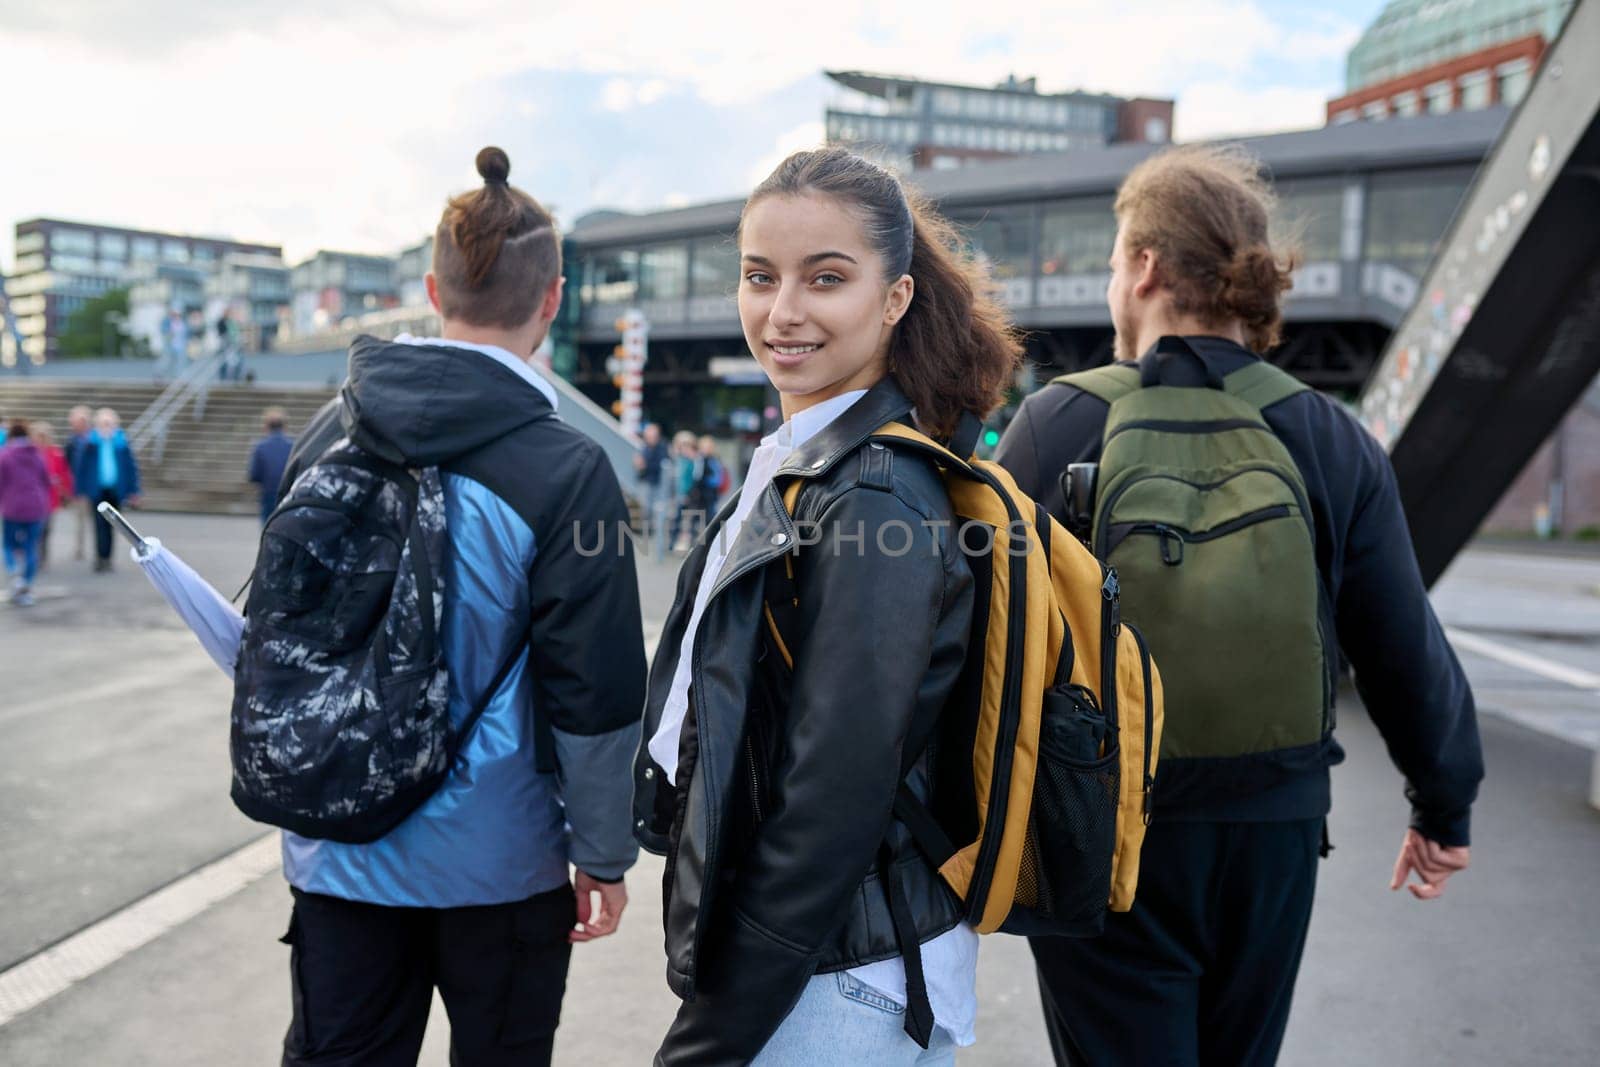 Portrait of teenage high school student, smiling confident girl 16, 17 years old with backpack looking at camera outdoor, on street of modern city. Urban life, adolescence, education, youth concept